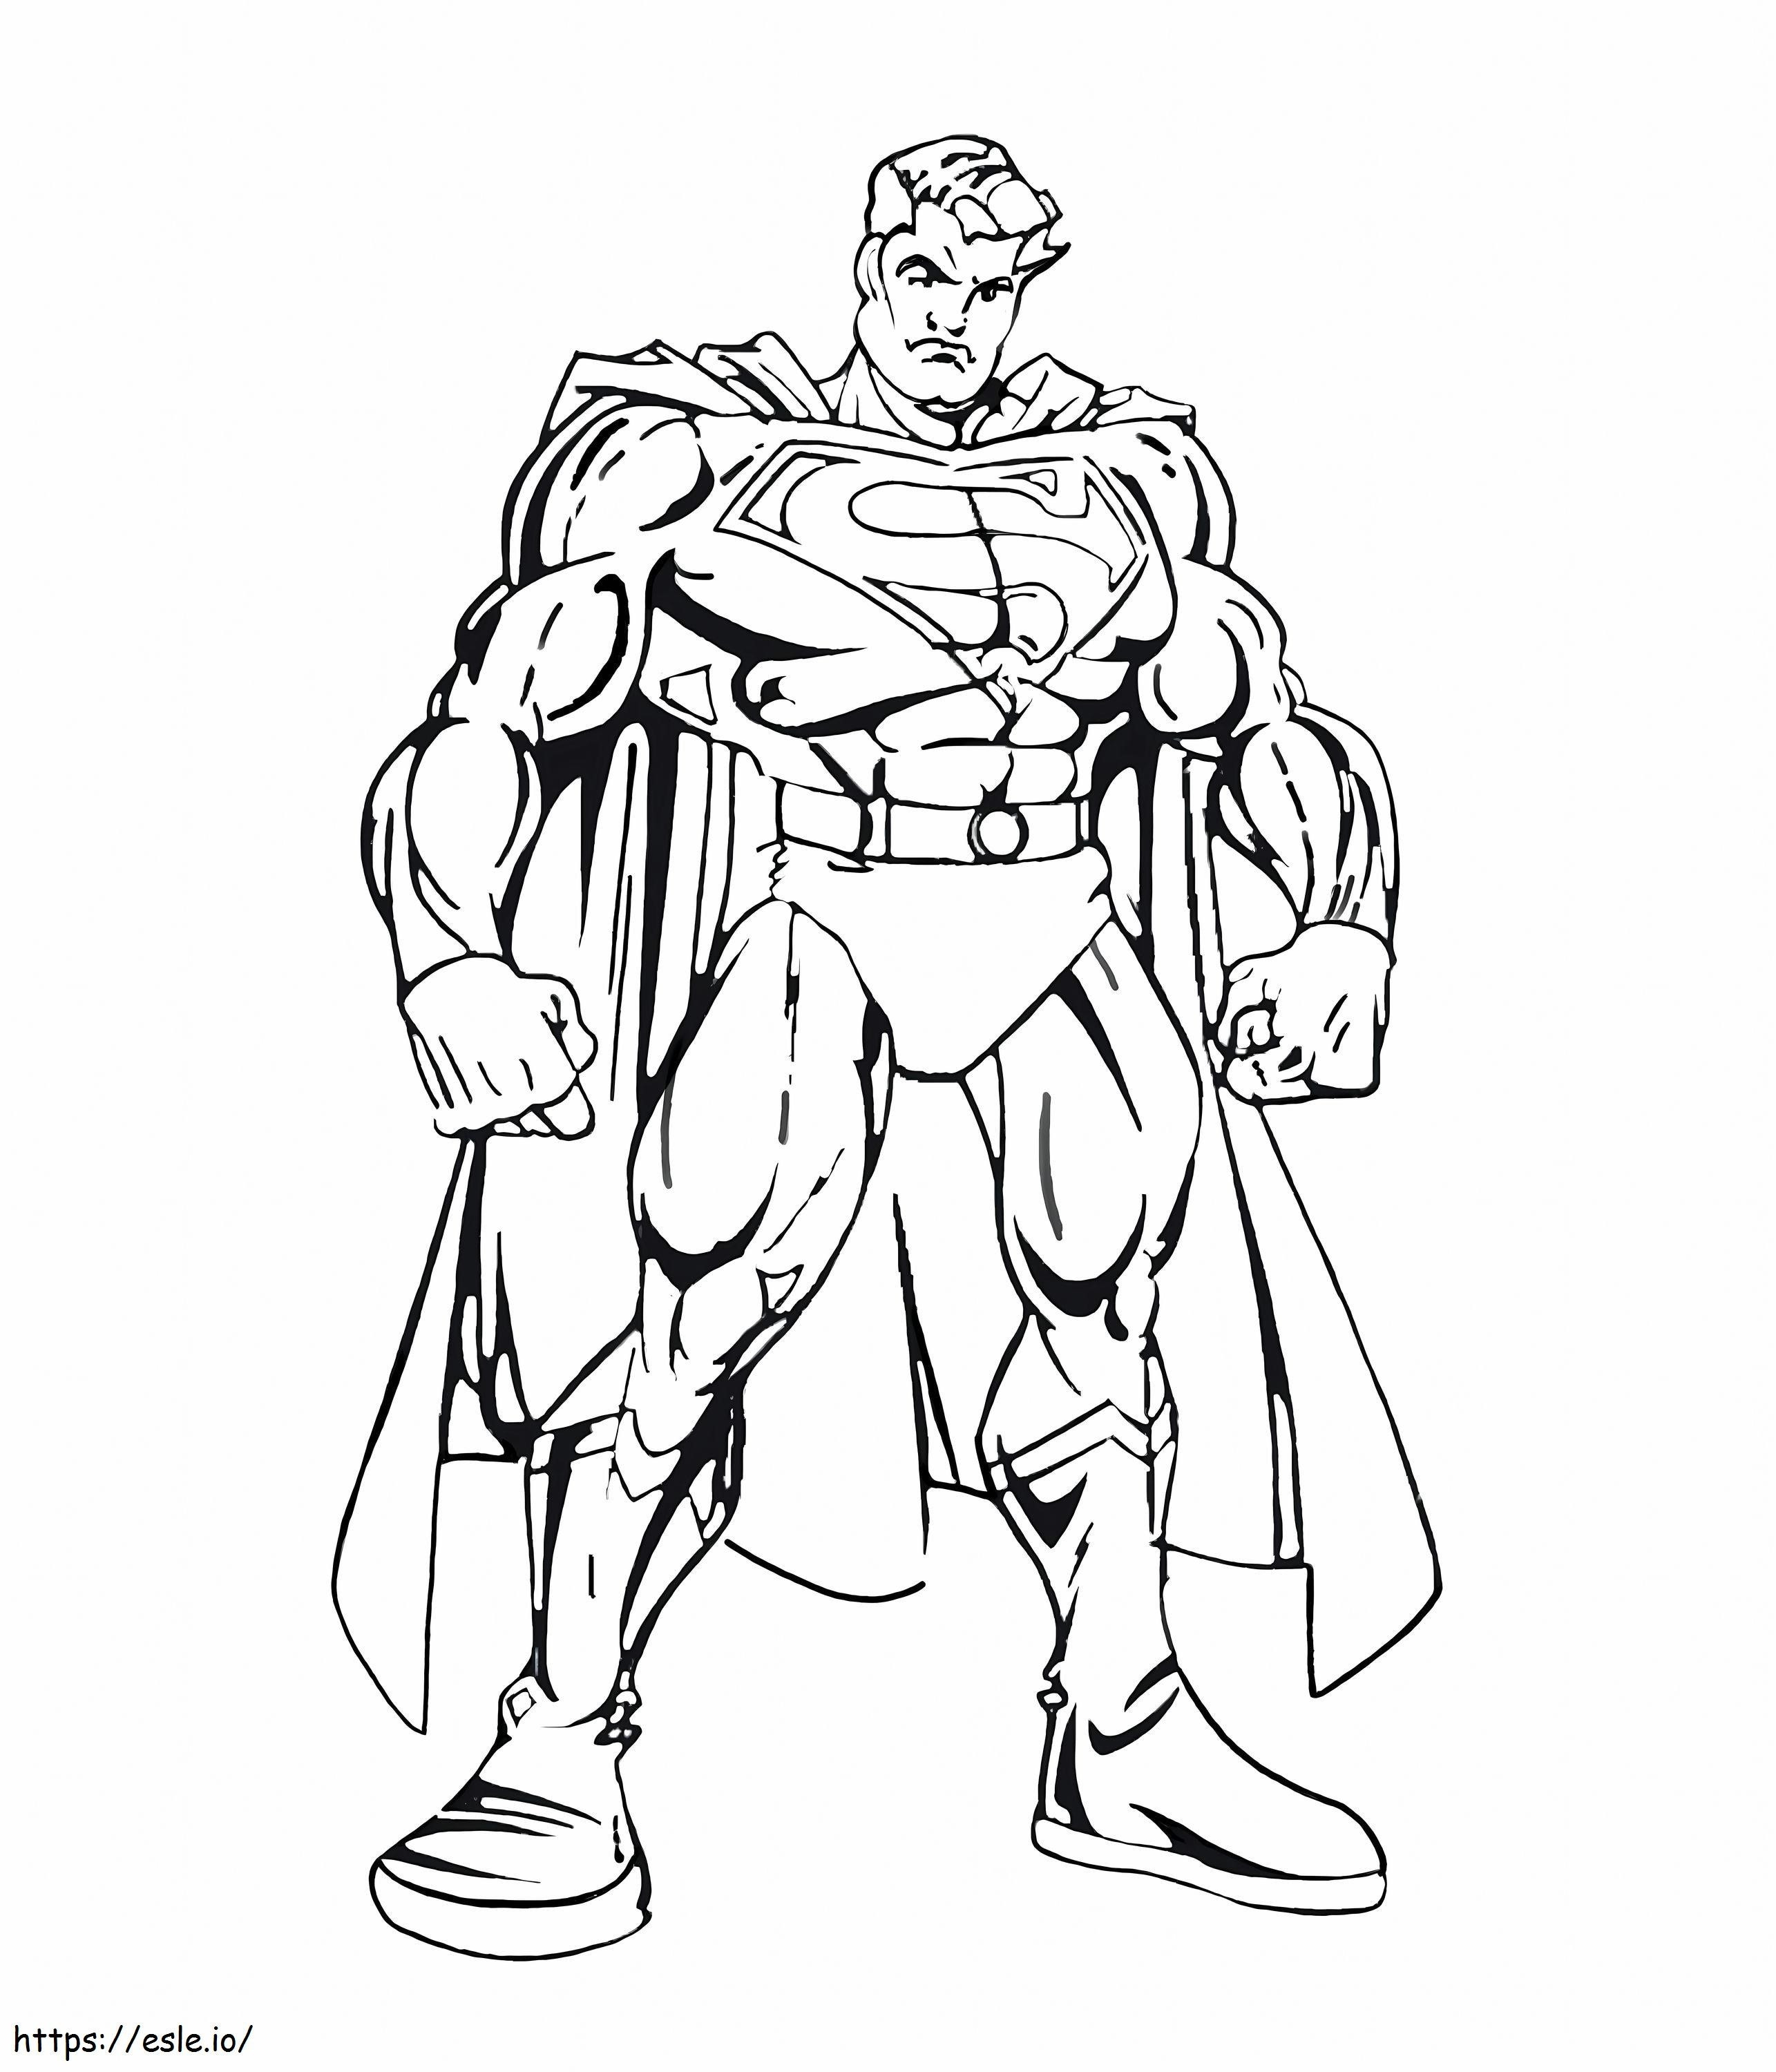 Draw Superman Strong coloring page